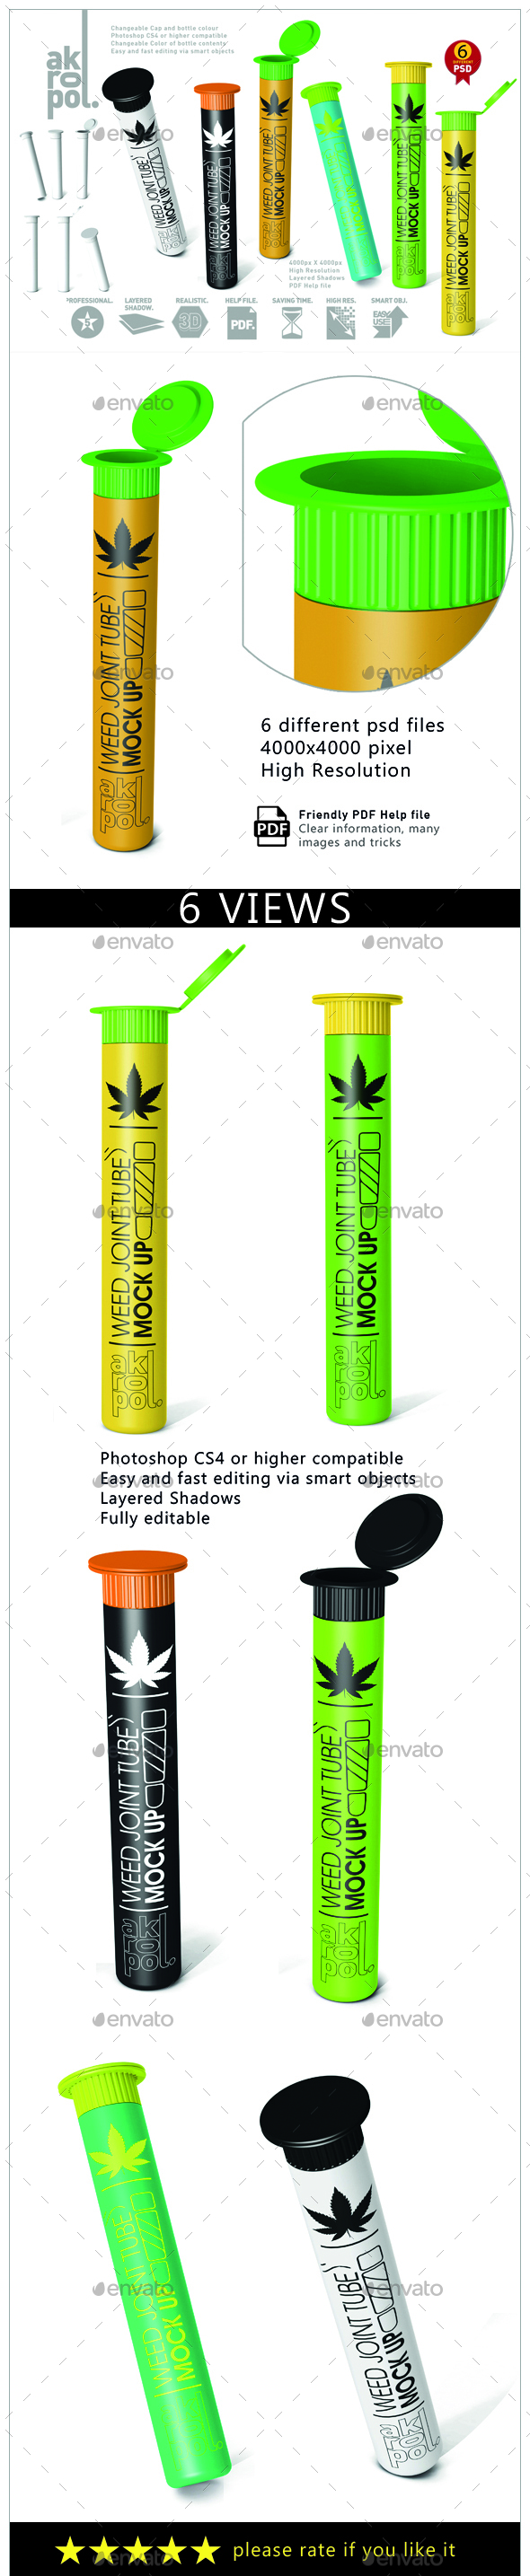 Tiered Joint Tube Display - (Display for Pre-Rolls) - Bud Bar